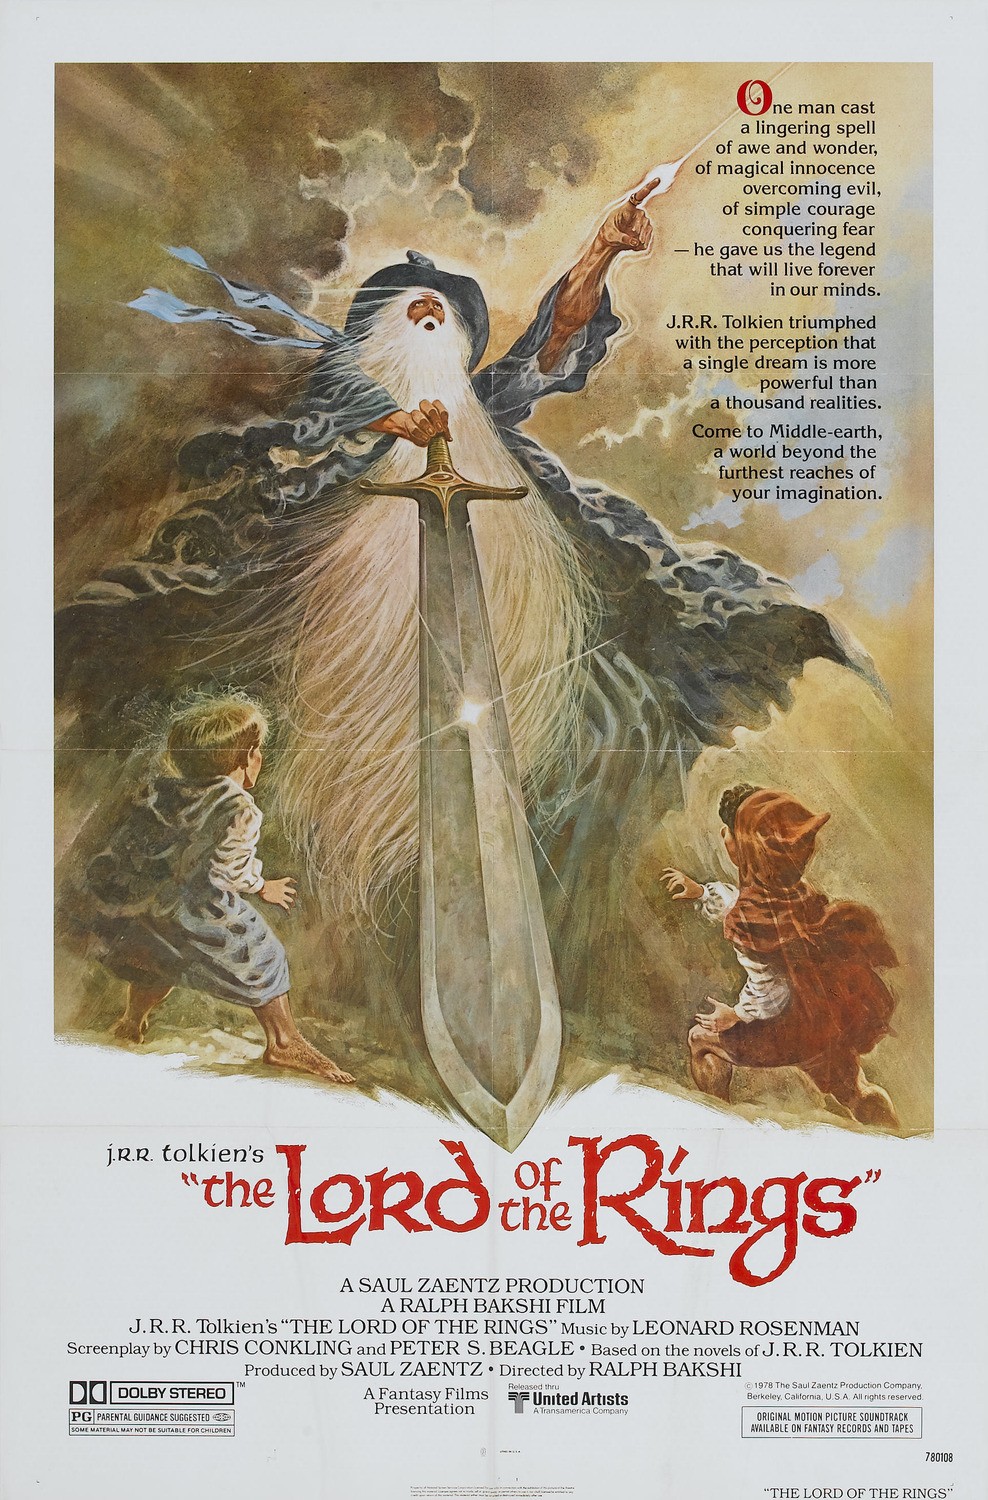 THE LORD OF THE RINGS (1978)